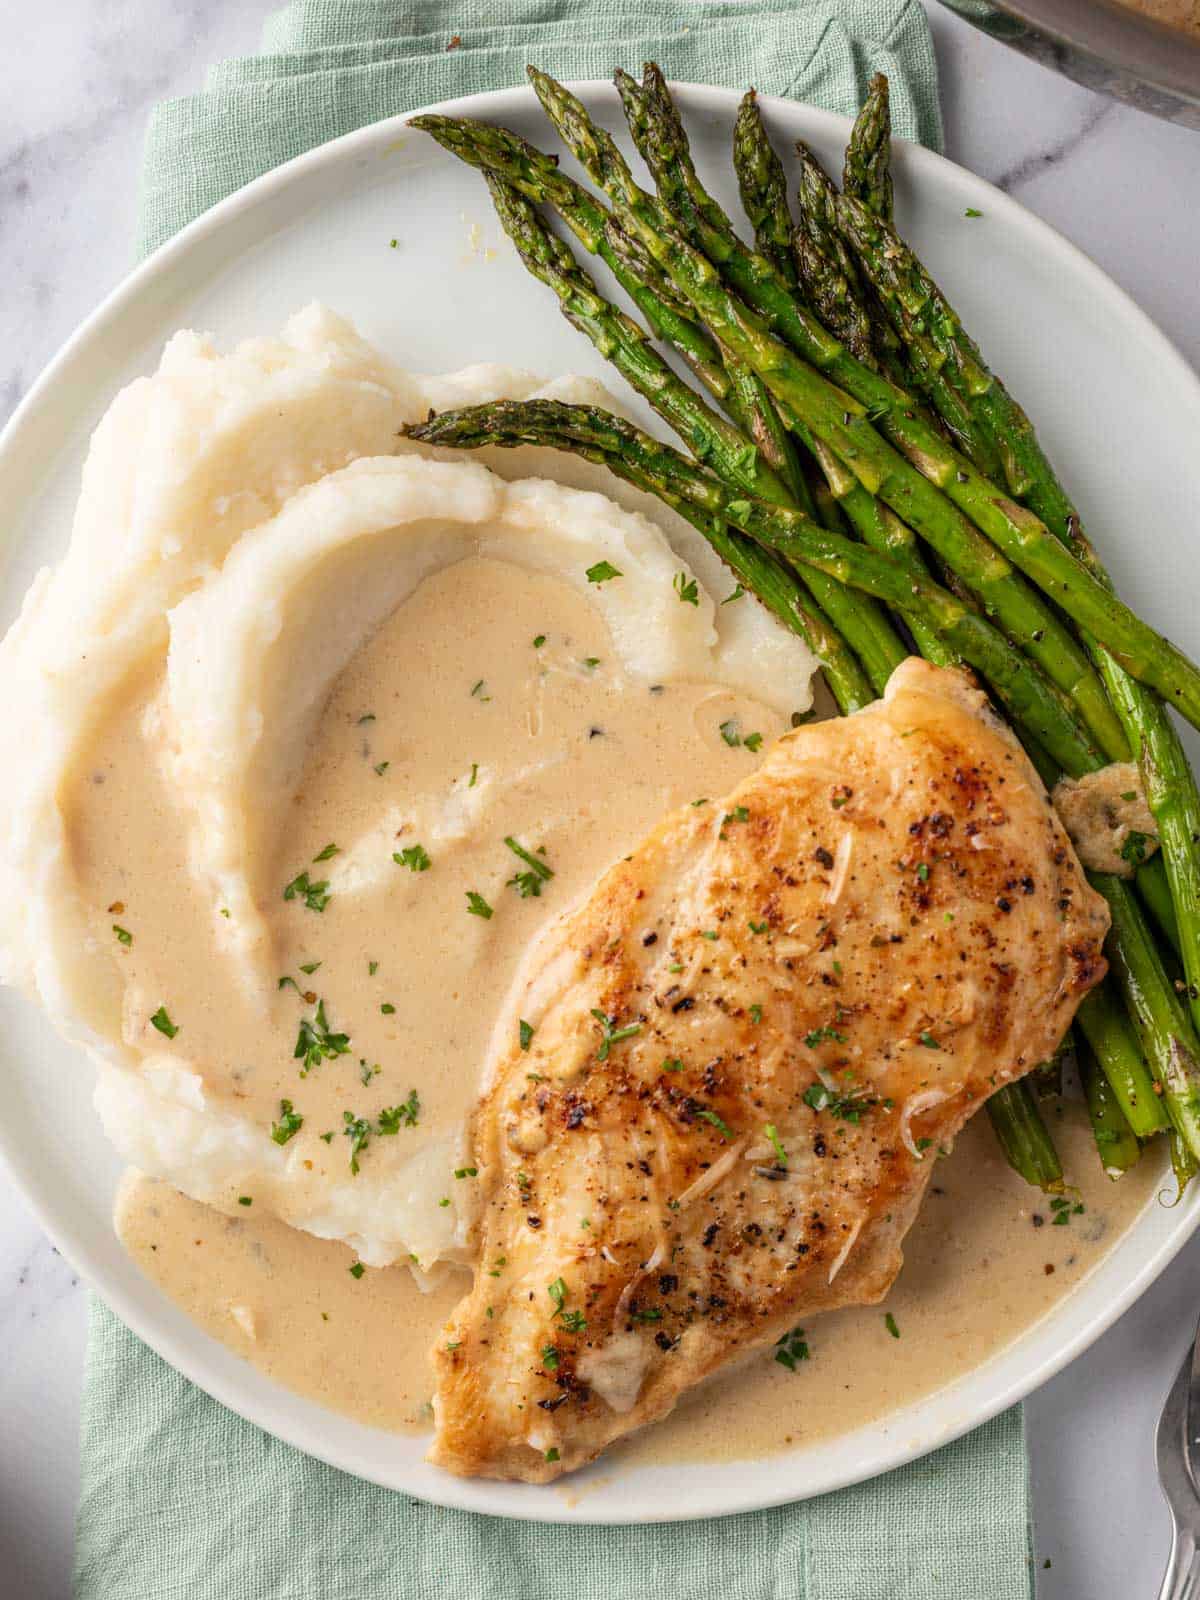 A plate of creamy garlic parmesan chicken with mashed potatoes and asparagus.